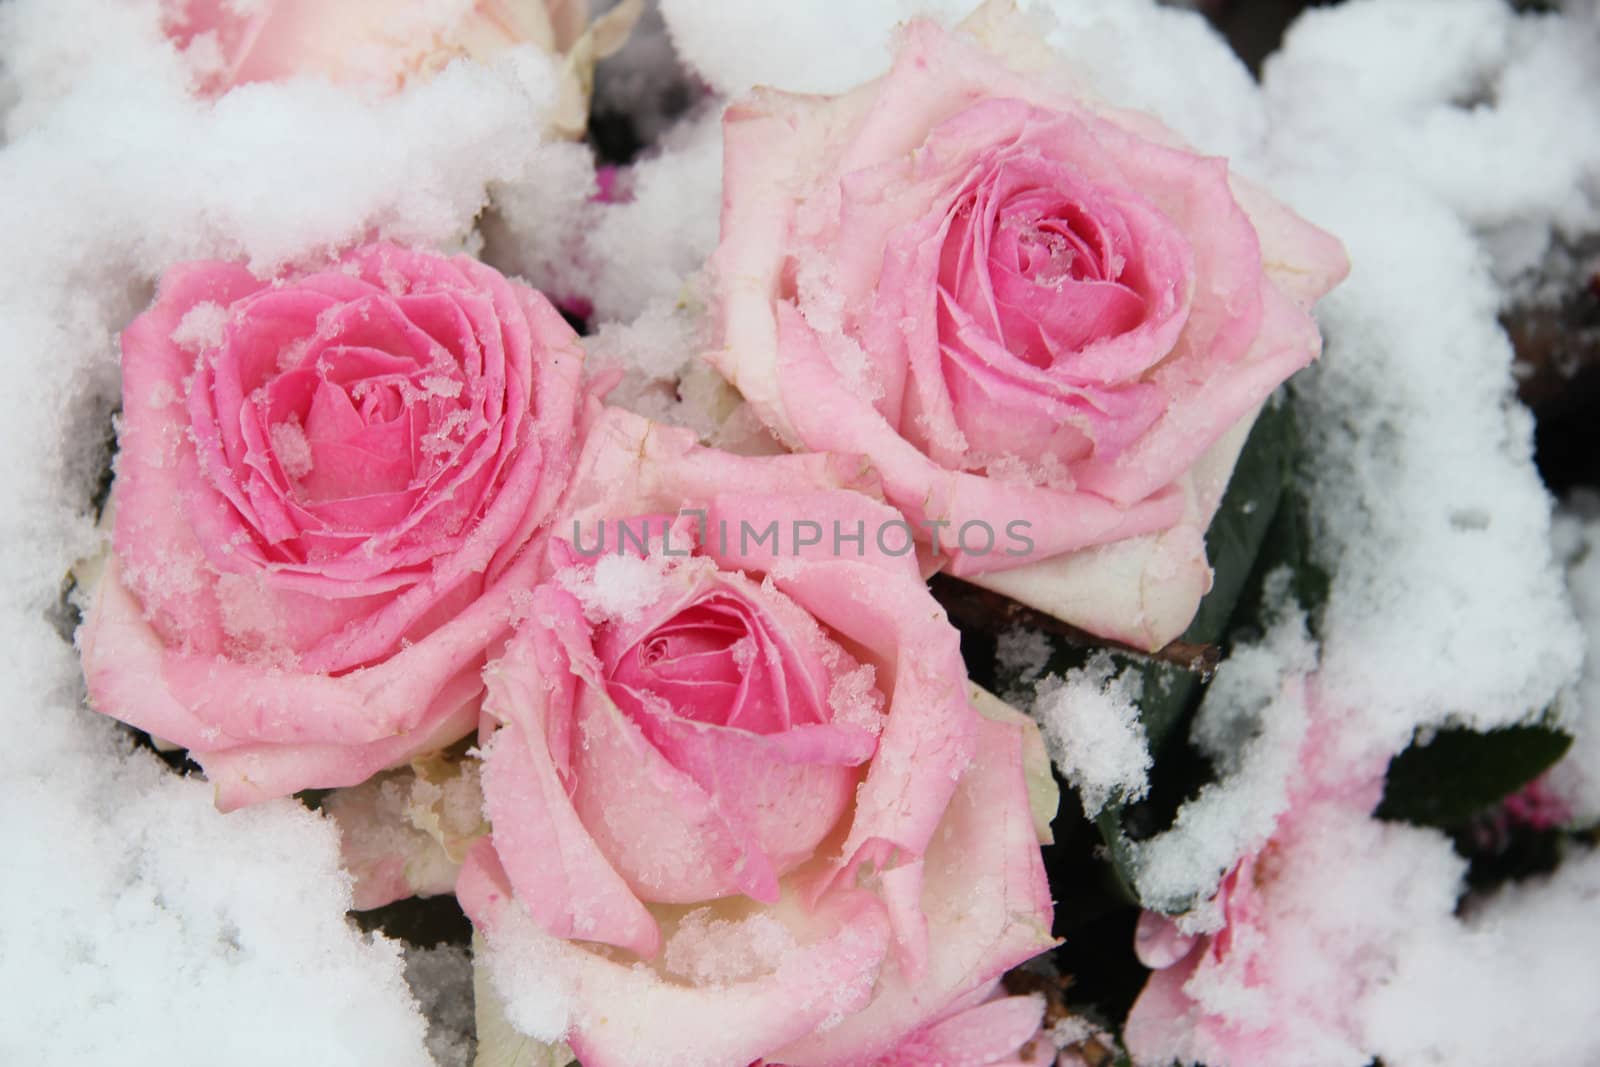 Big pink roses, covered with fresh snow